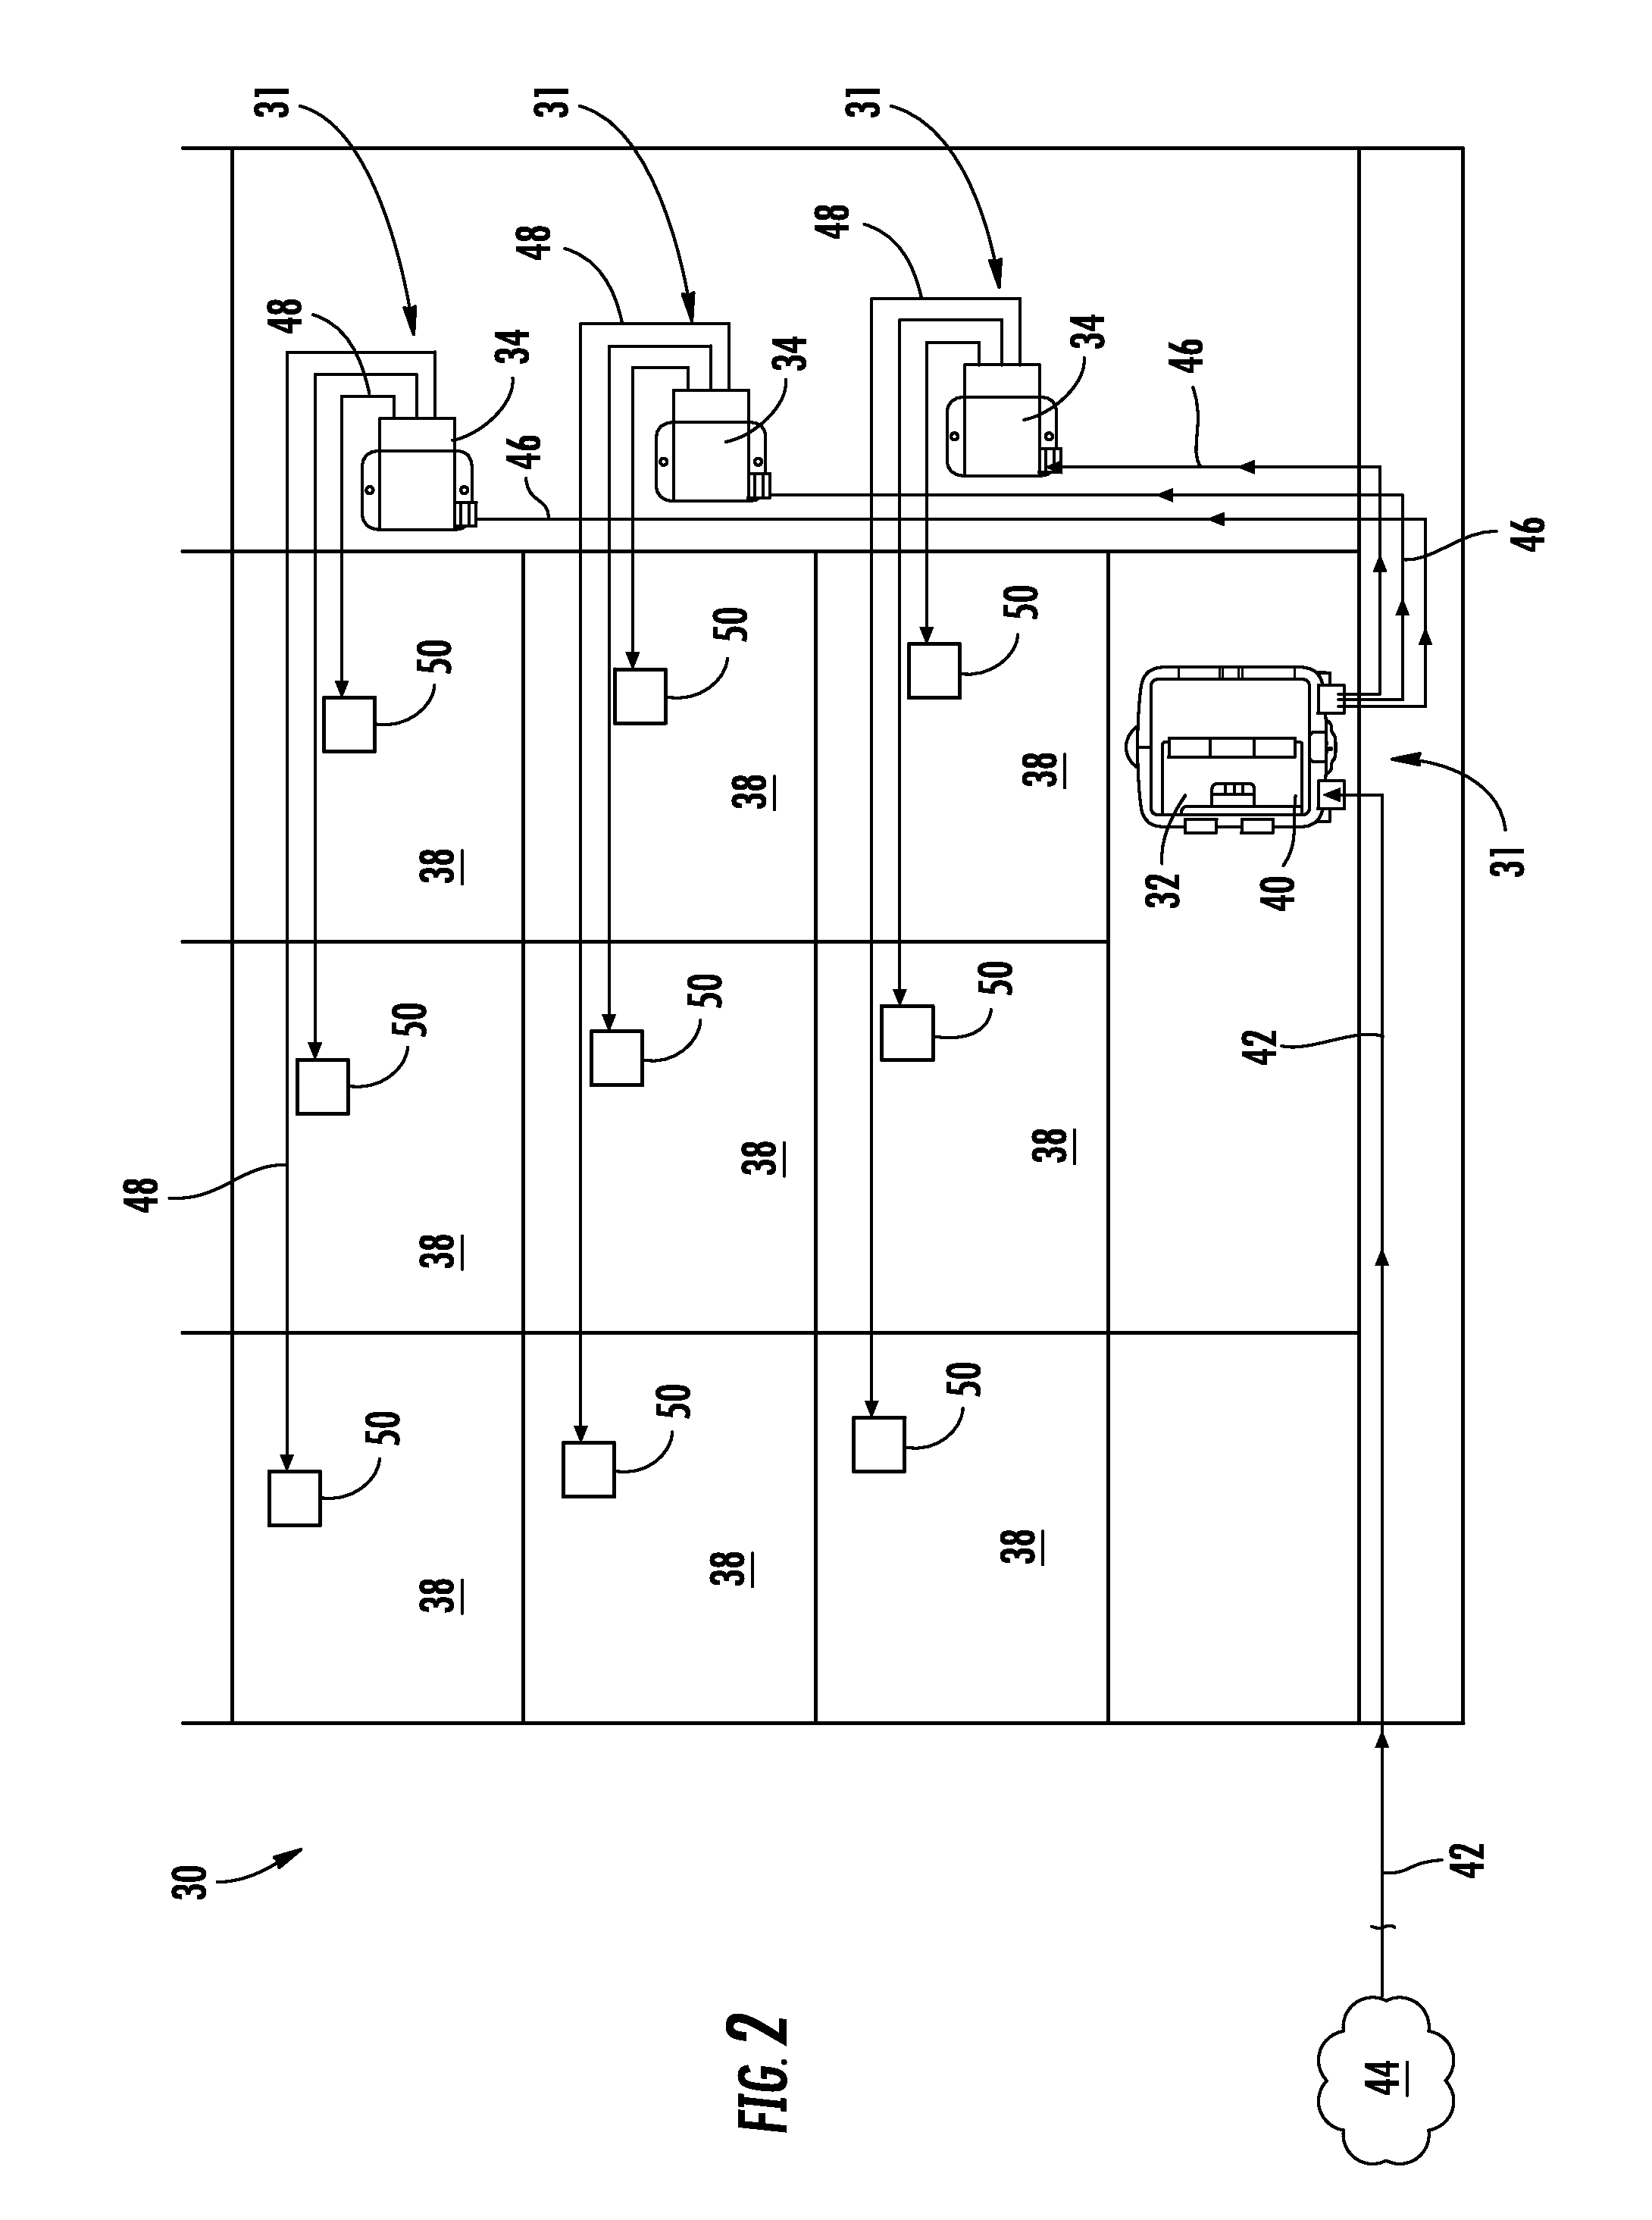 Fiber Optic Terminals, Systems, and Methods for Network Service Management